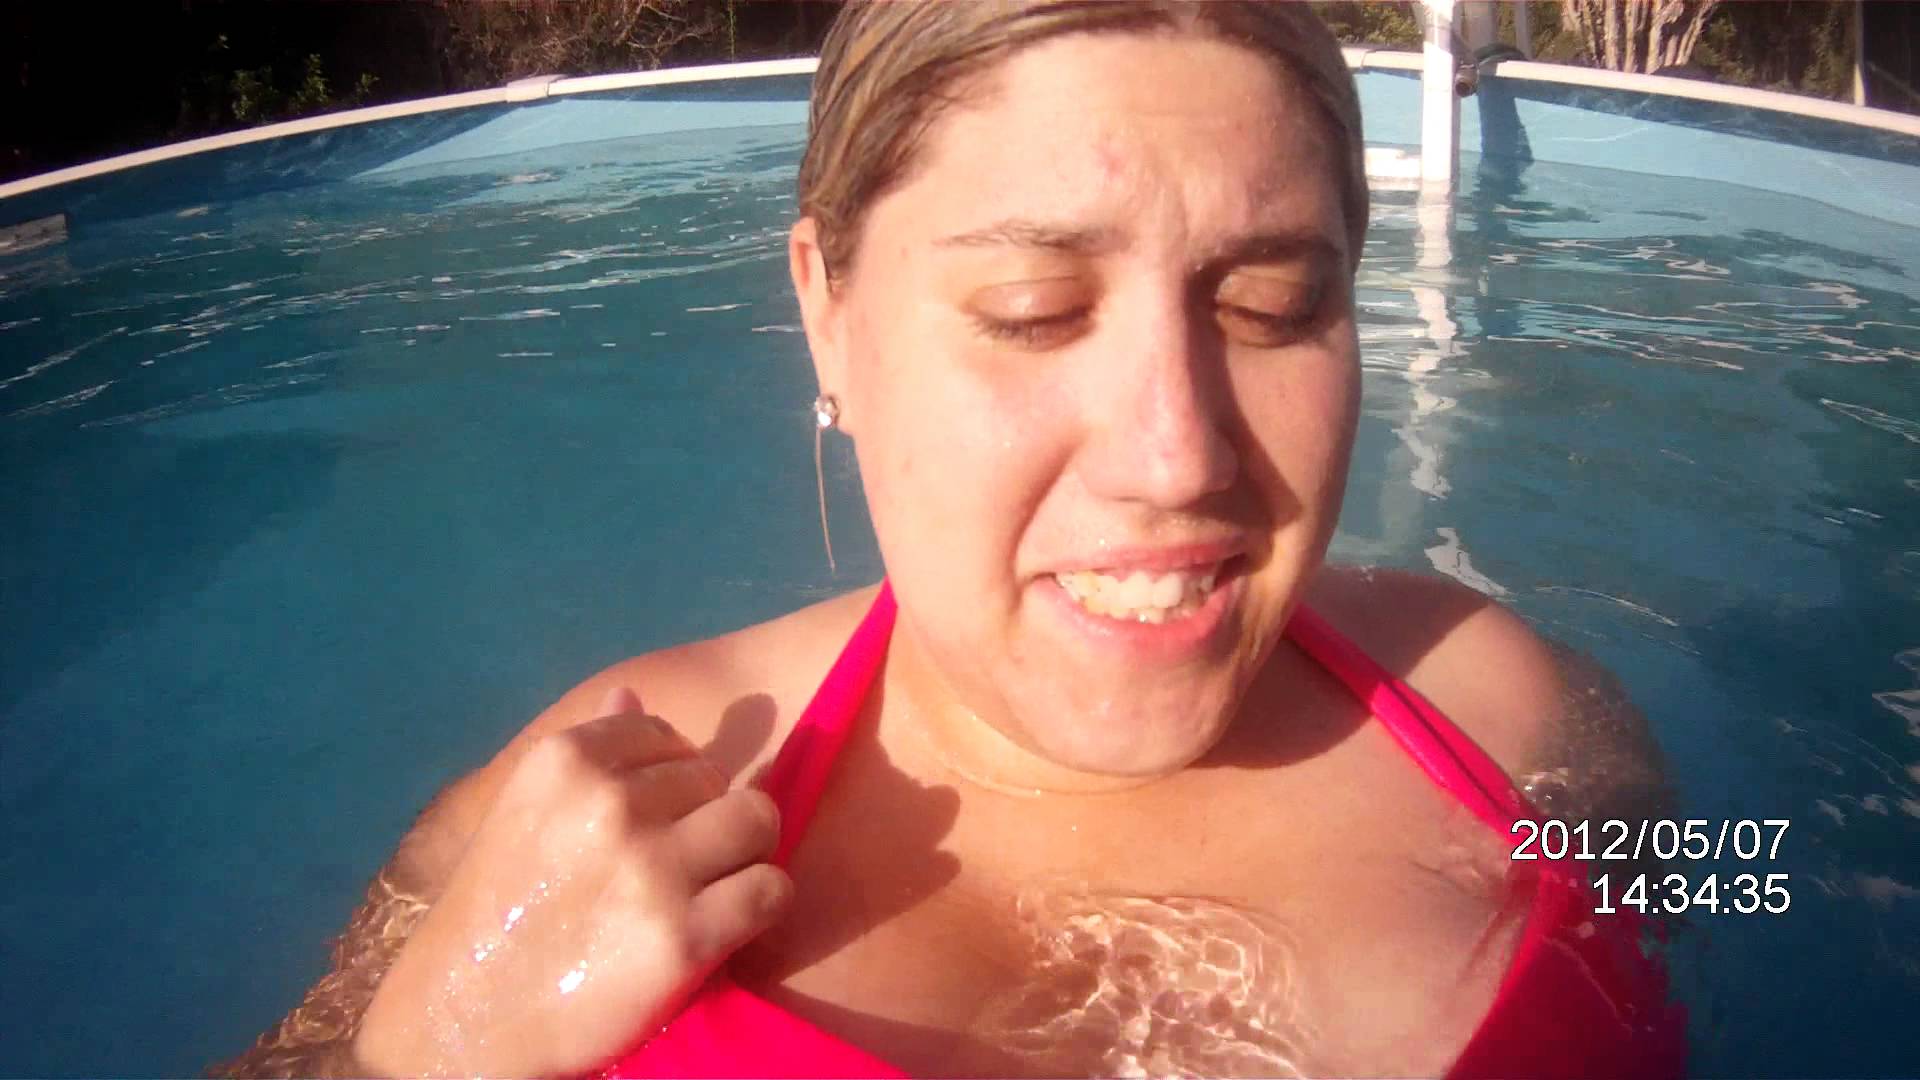 My wife asking to be recorded holding her breath underwater - YouTube